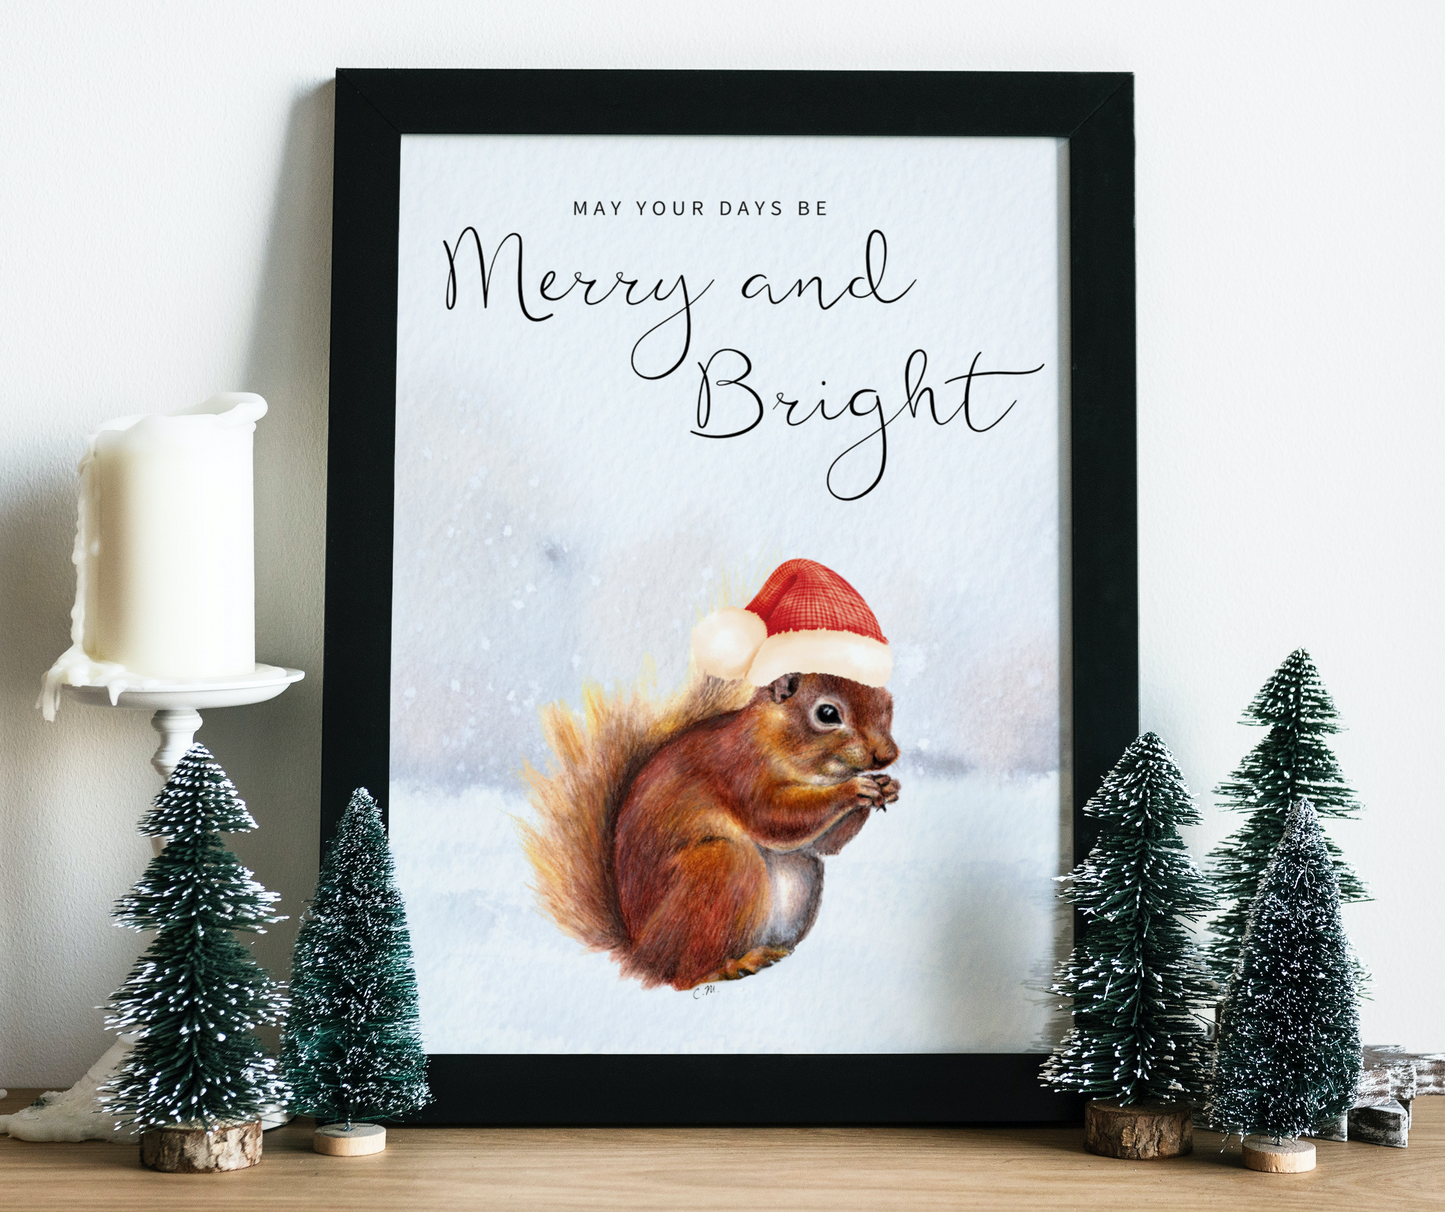 Squirrel Christmas decor,Merry and bright decor,Santa hat squirrel, Squirrel home decor, Woodland animal art, Cute animal Holiday decor